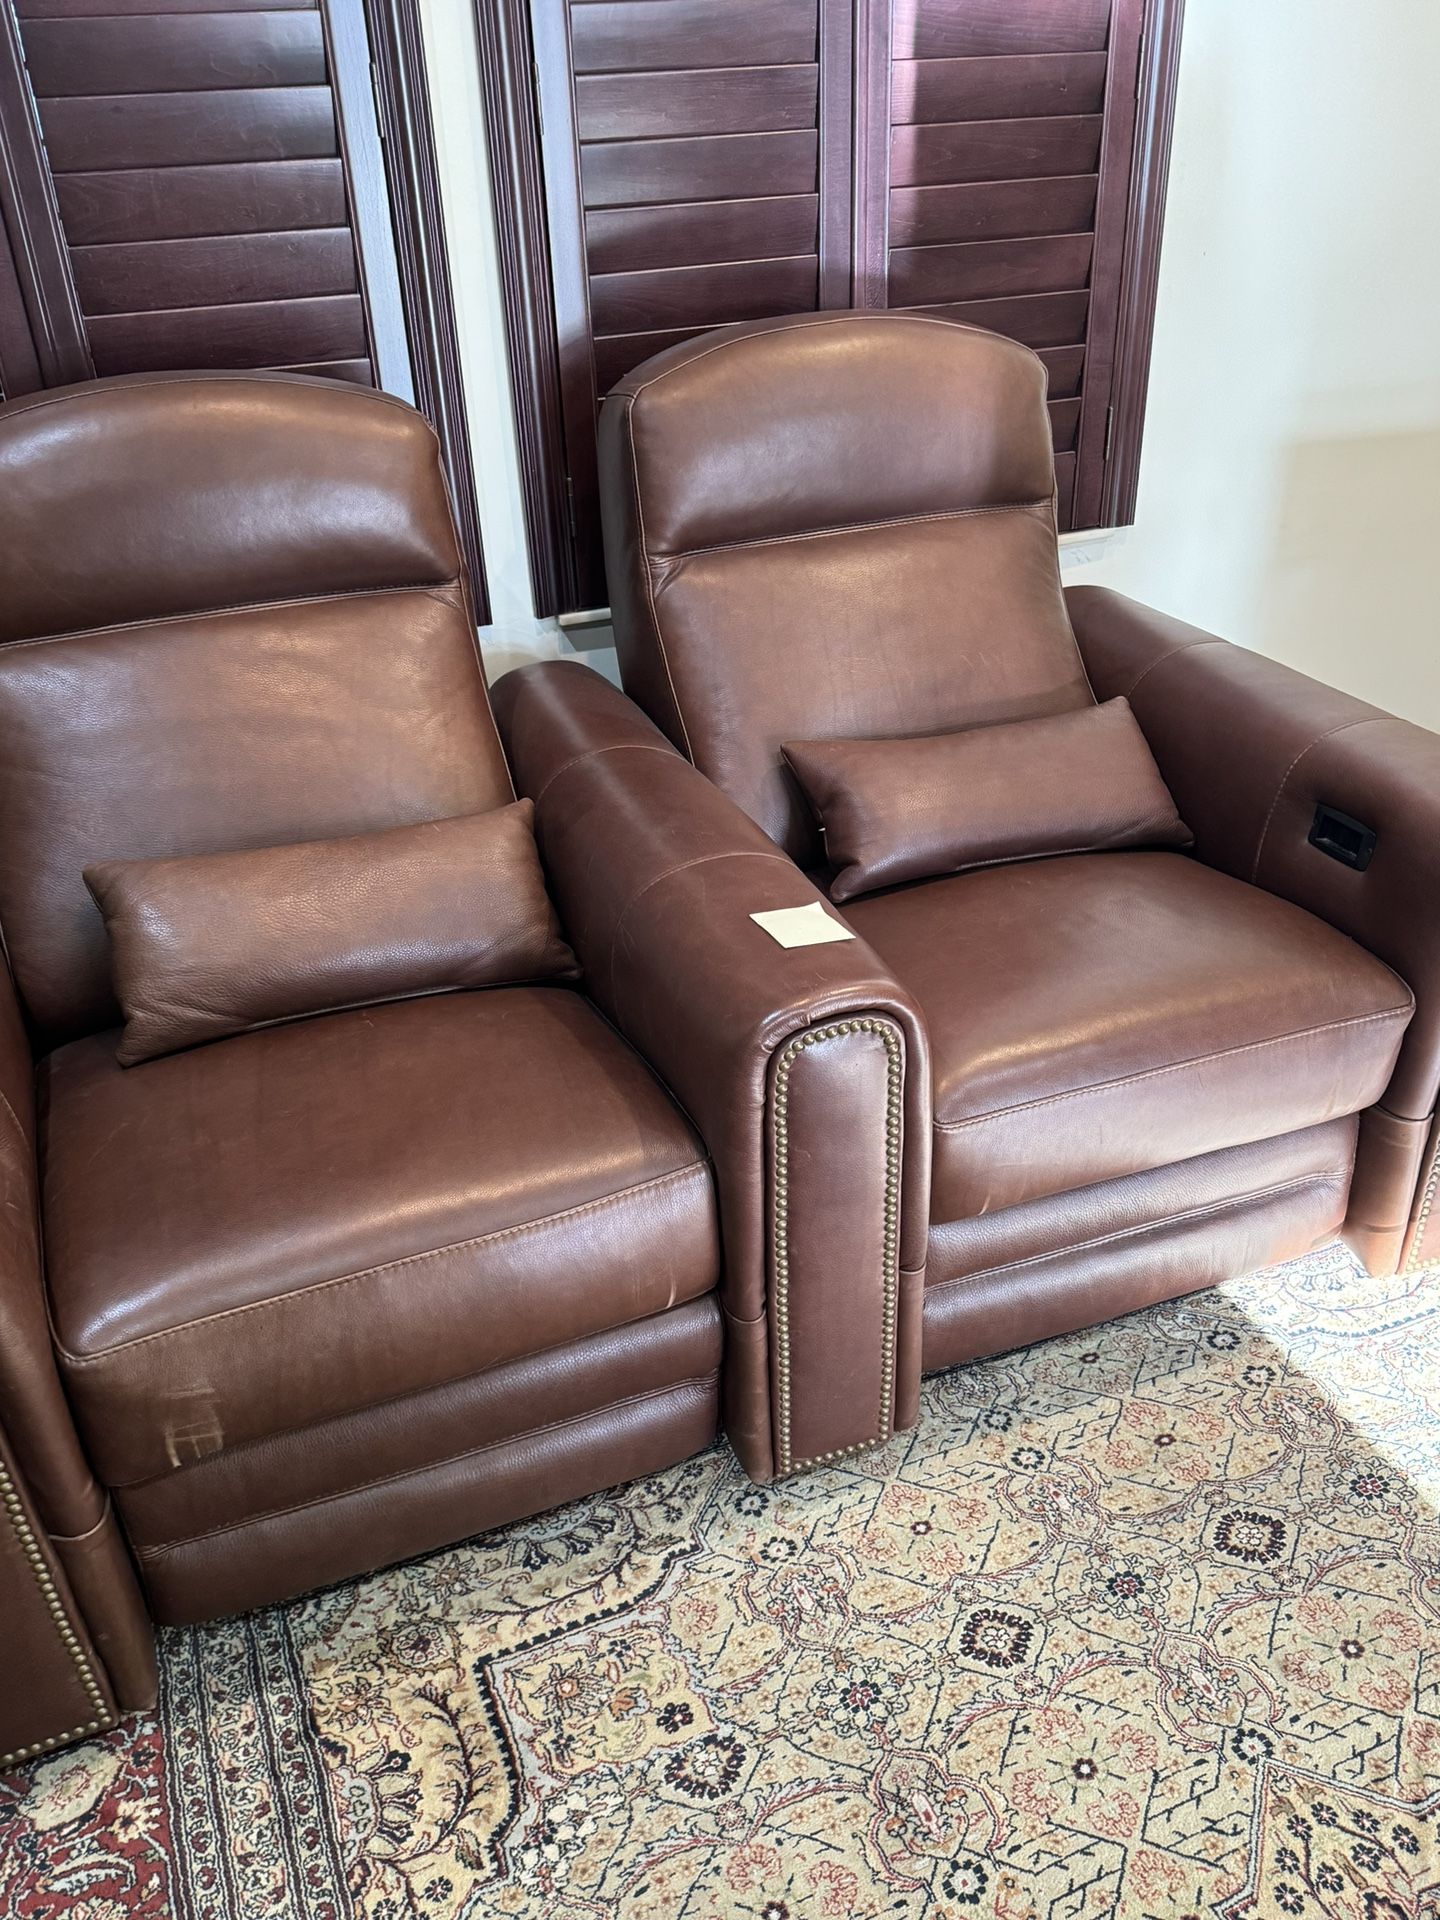 Beautiful Leather Electric Recliners - 74” x 38”  Originally $4400.    Asking $899